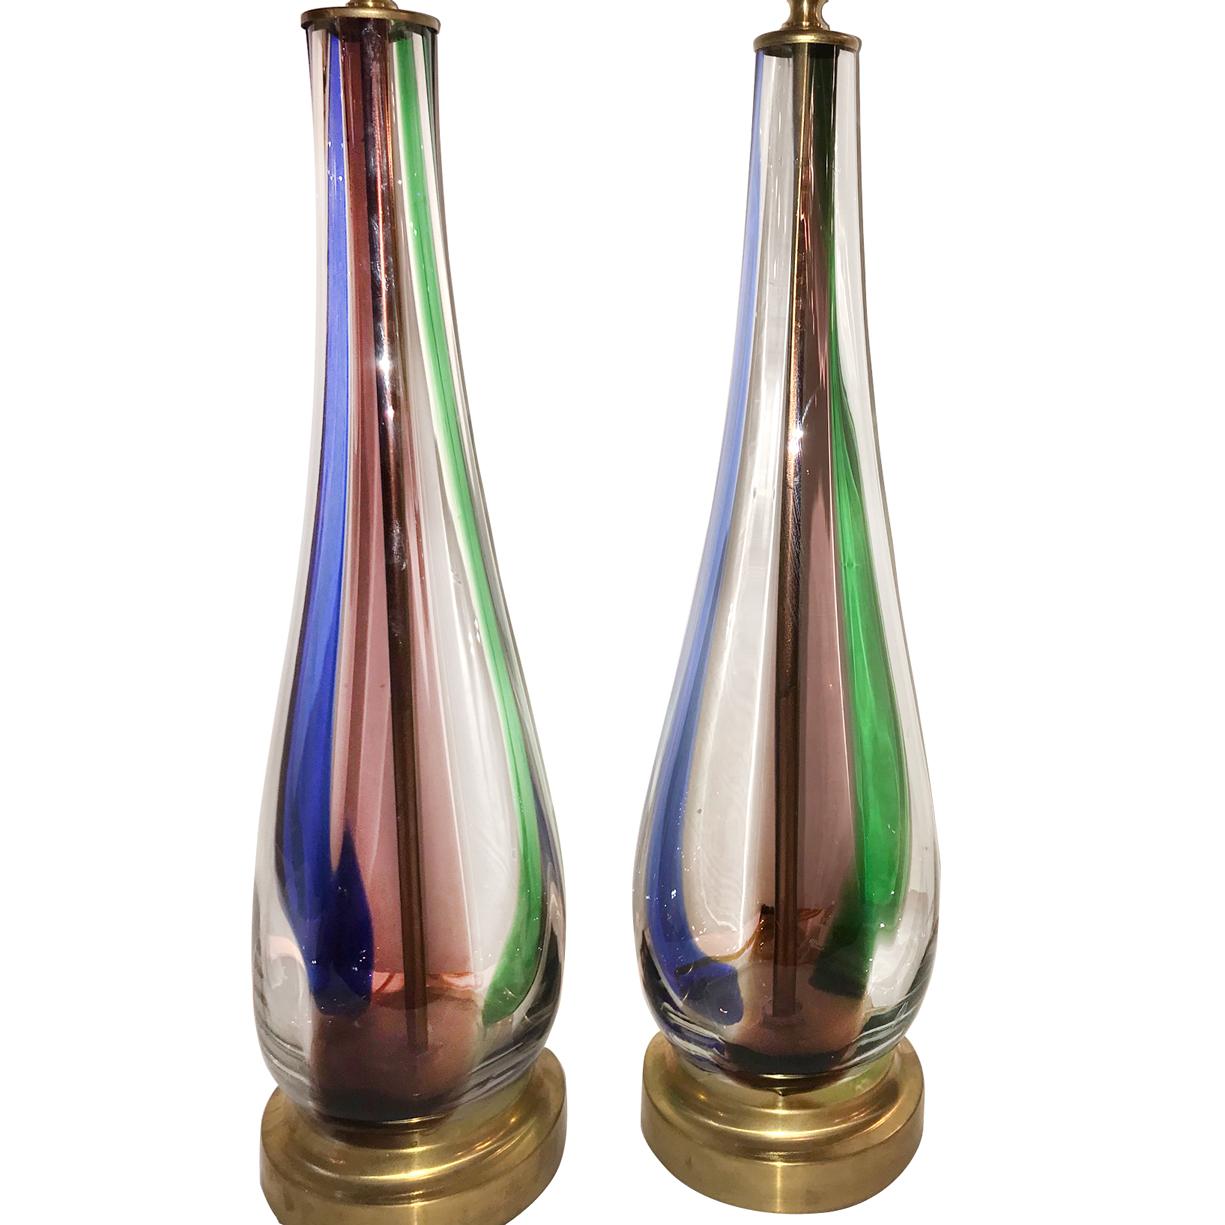 A pair of 1960s Murano table lamps with gilt bases.

Measurements:
Height of body 19